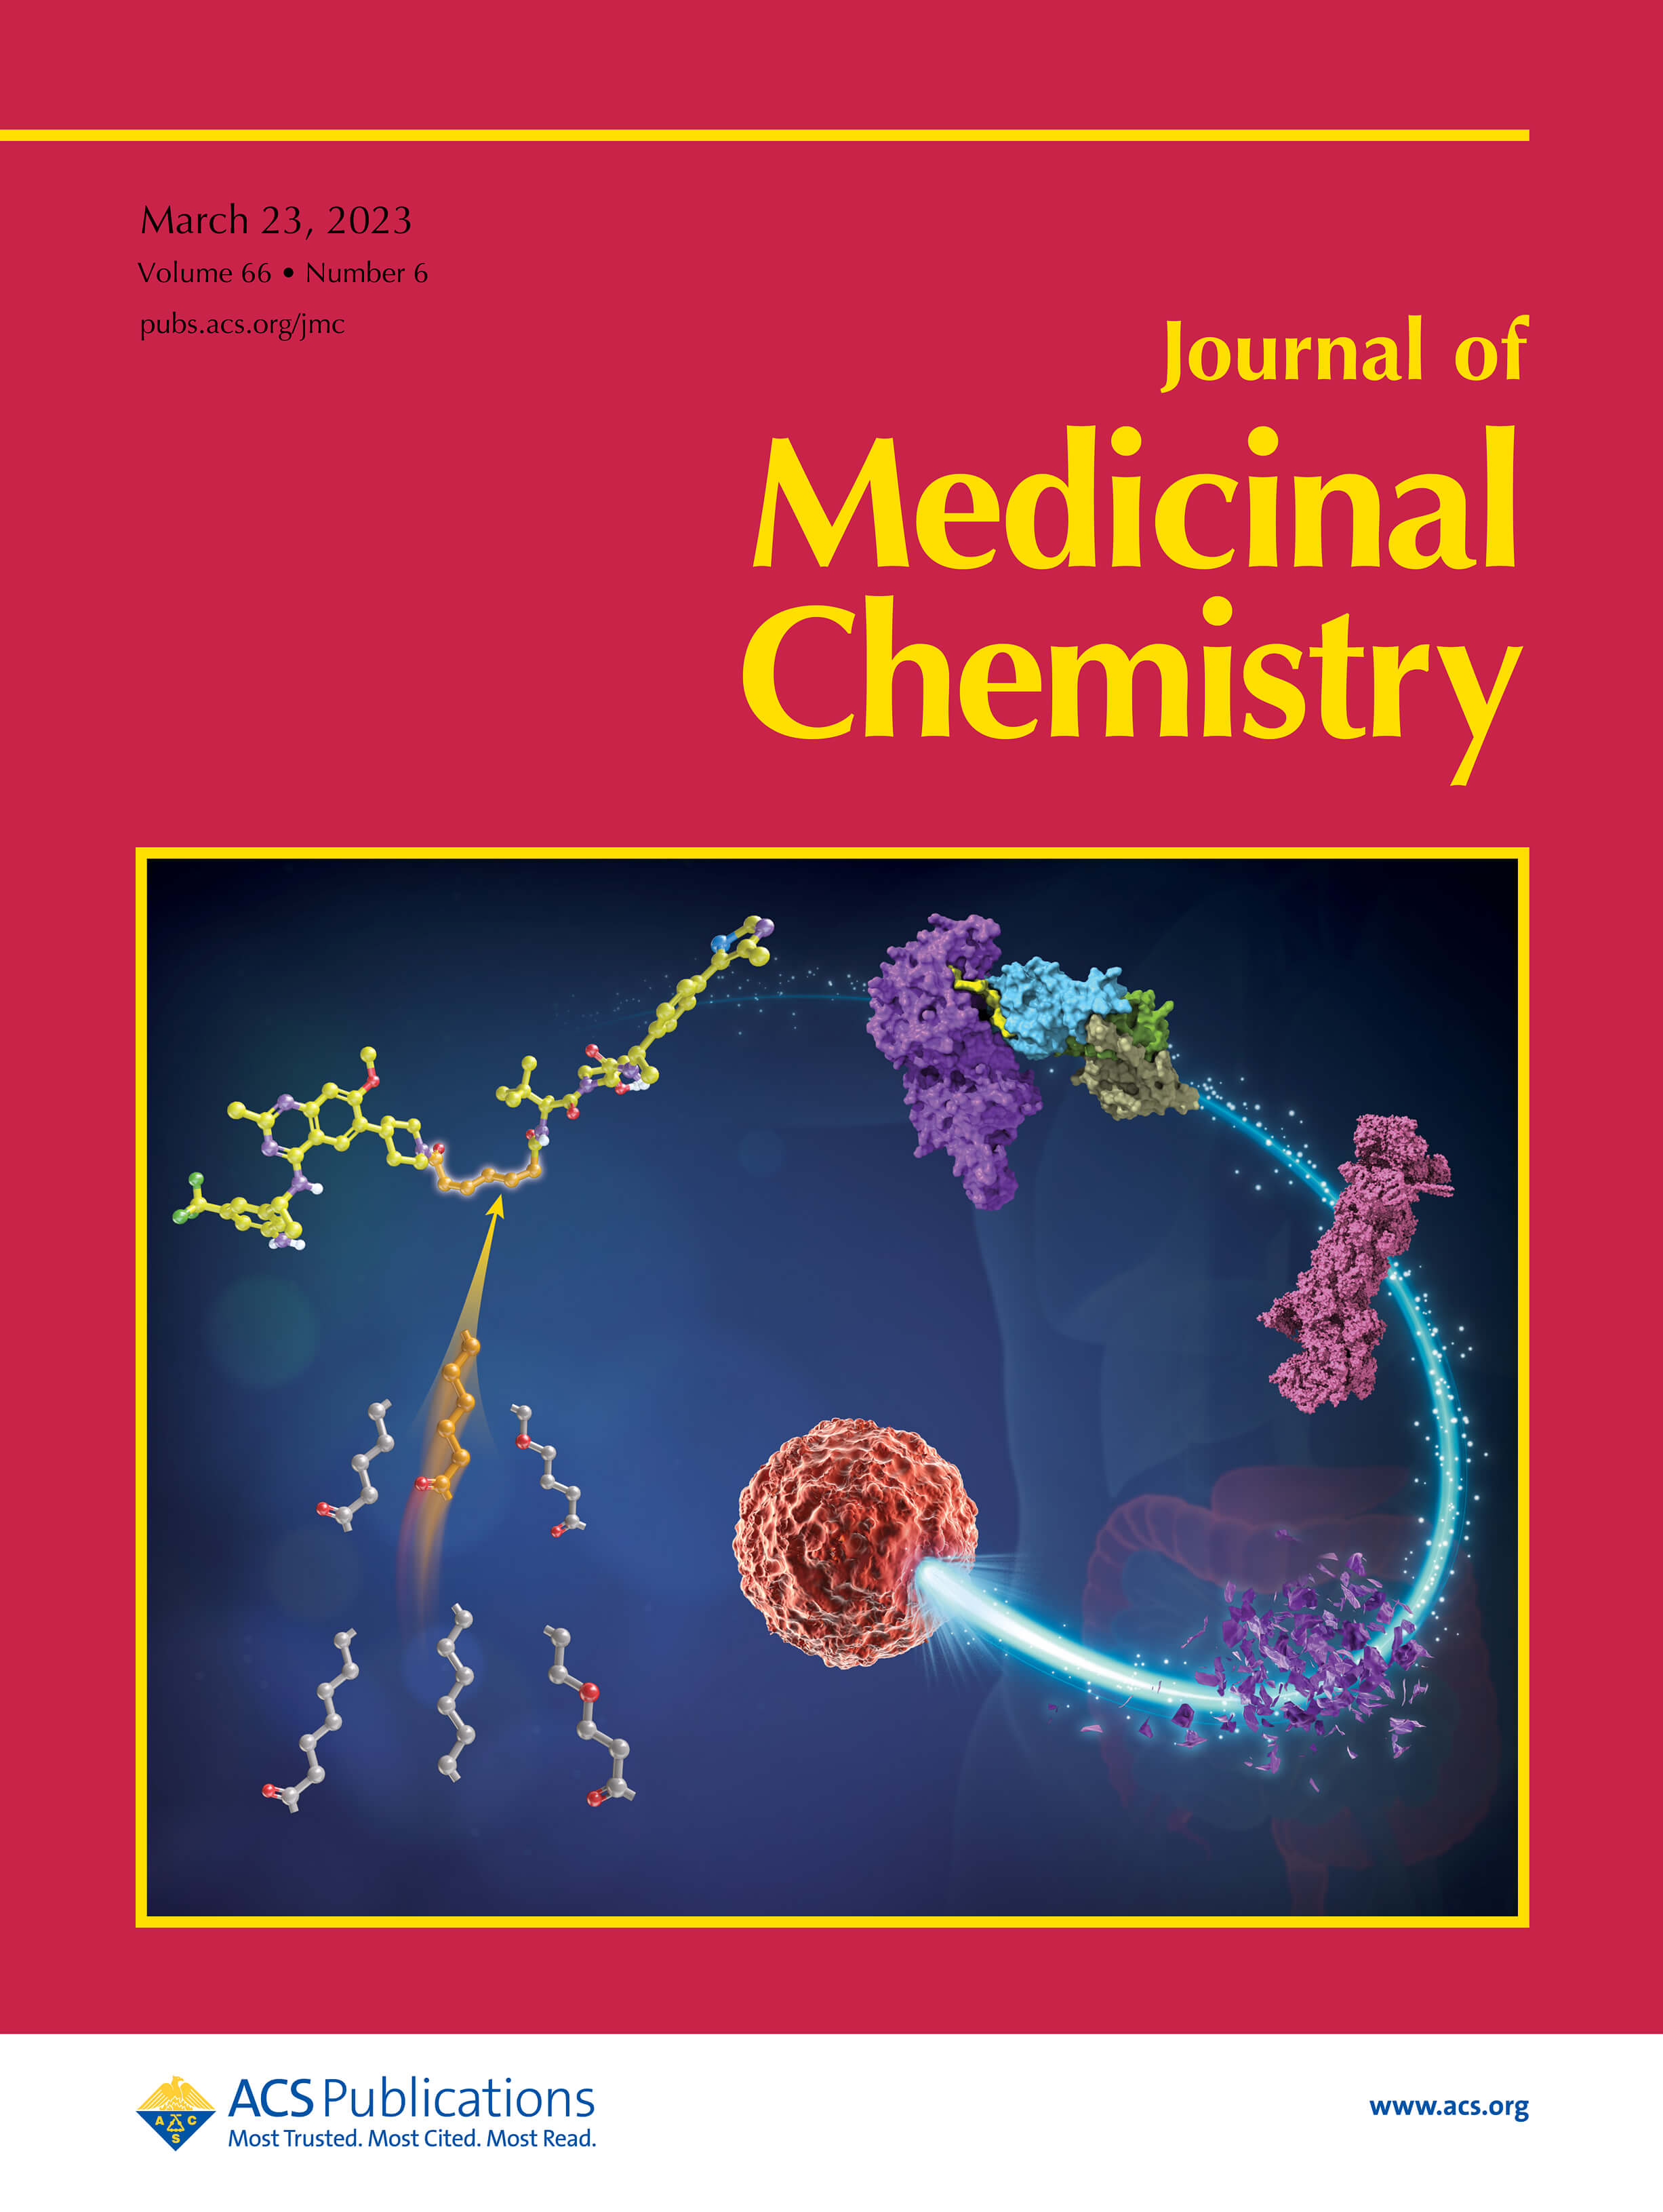 LetPub Journal Cover Art Design - Discovery of a Potent, Cooperative, and Selective SOS1 PROTAC ZZ151 with In Vivo Antitumor Efficacy in KRAS-Mutant Cancers